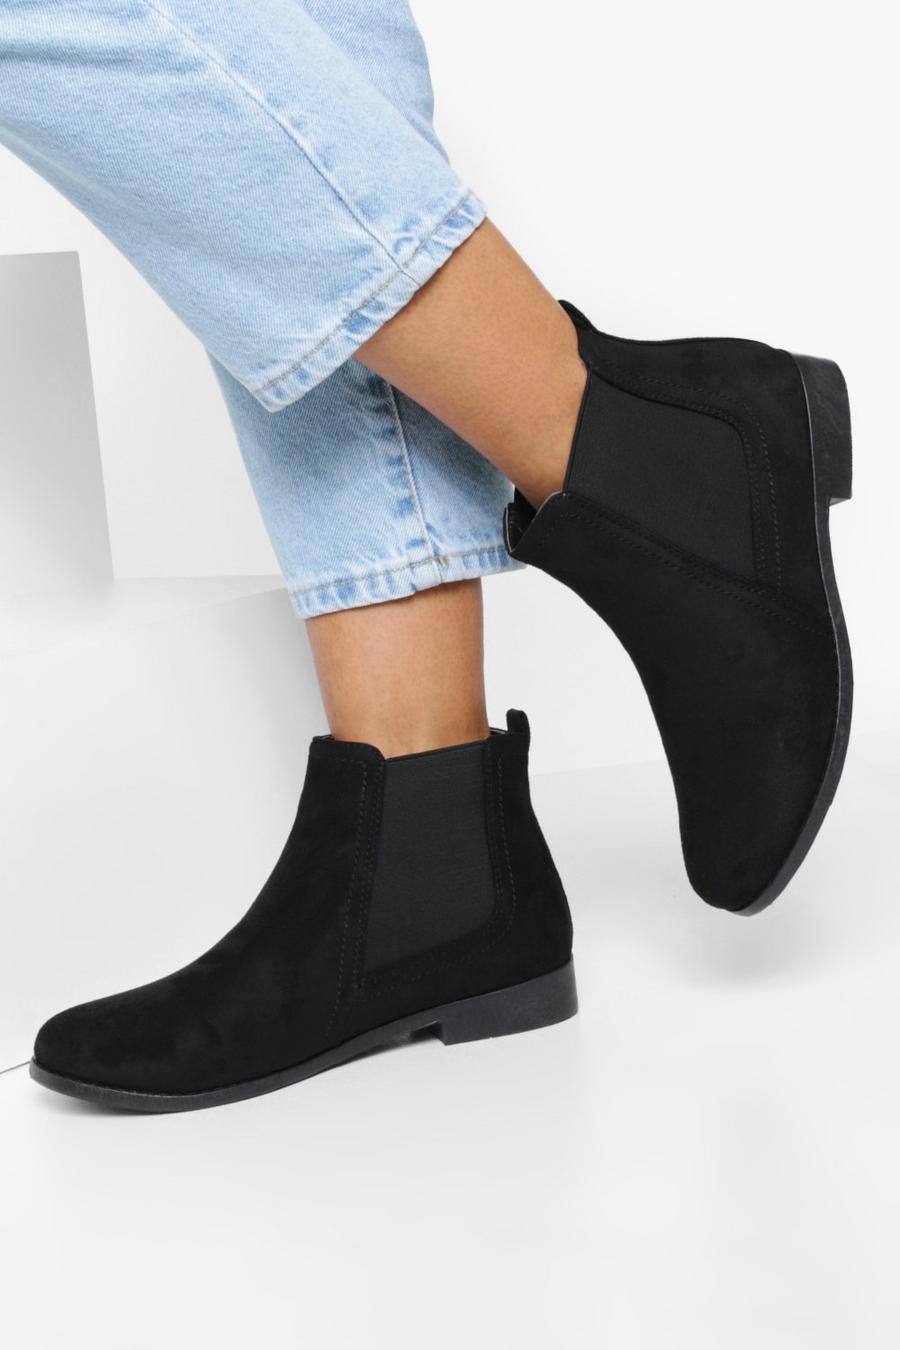 Ankle Boots, Black & Heeled Ankle Boots For Women